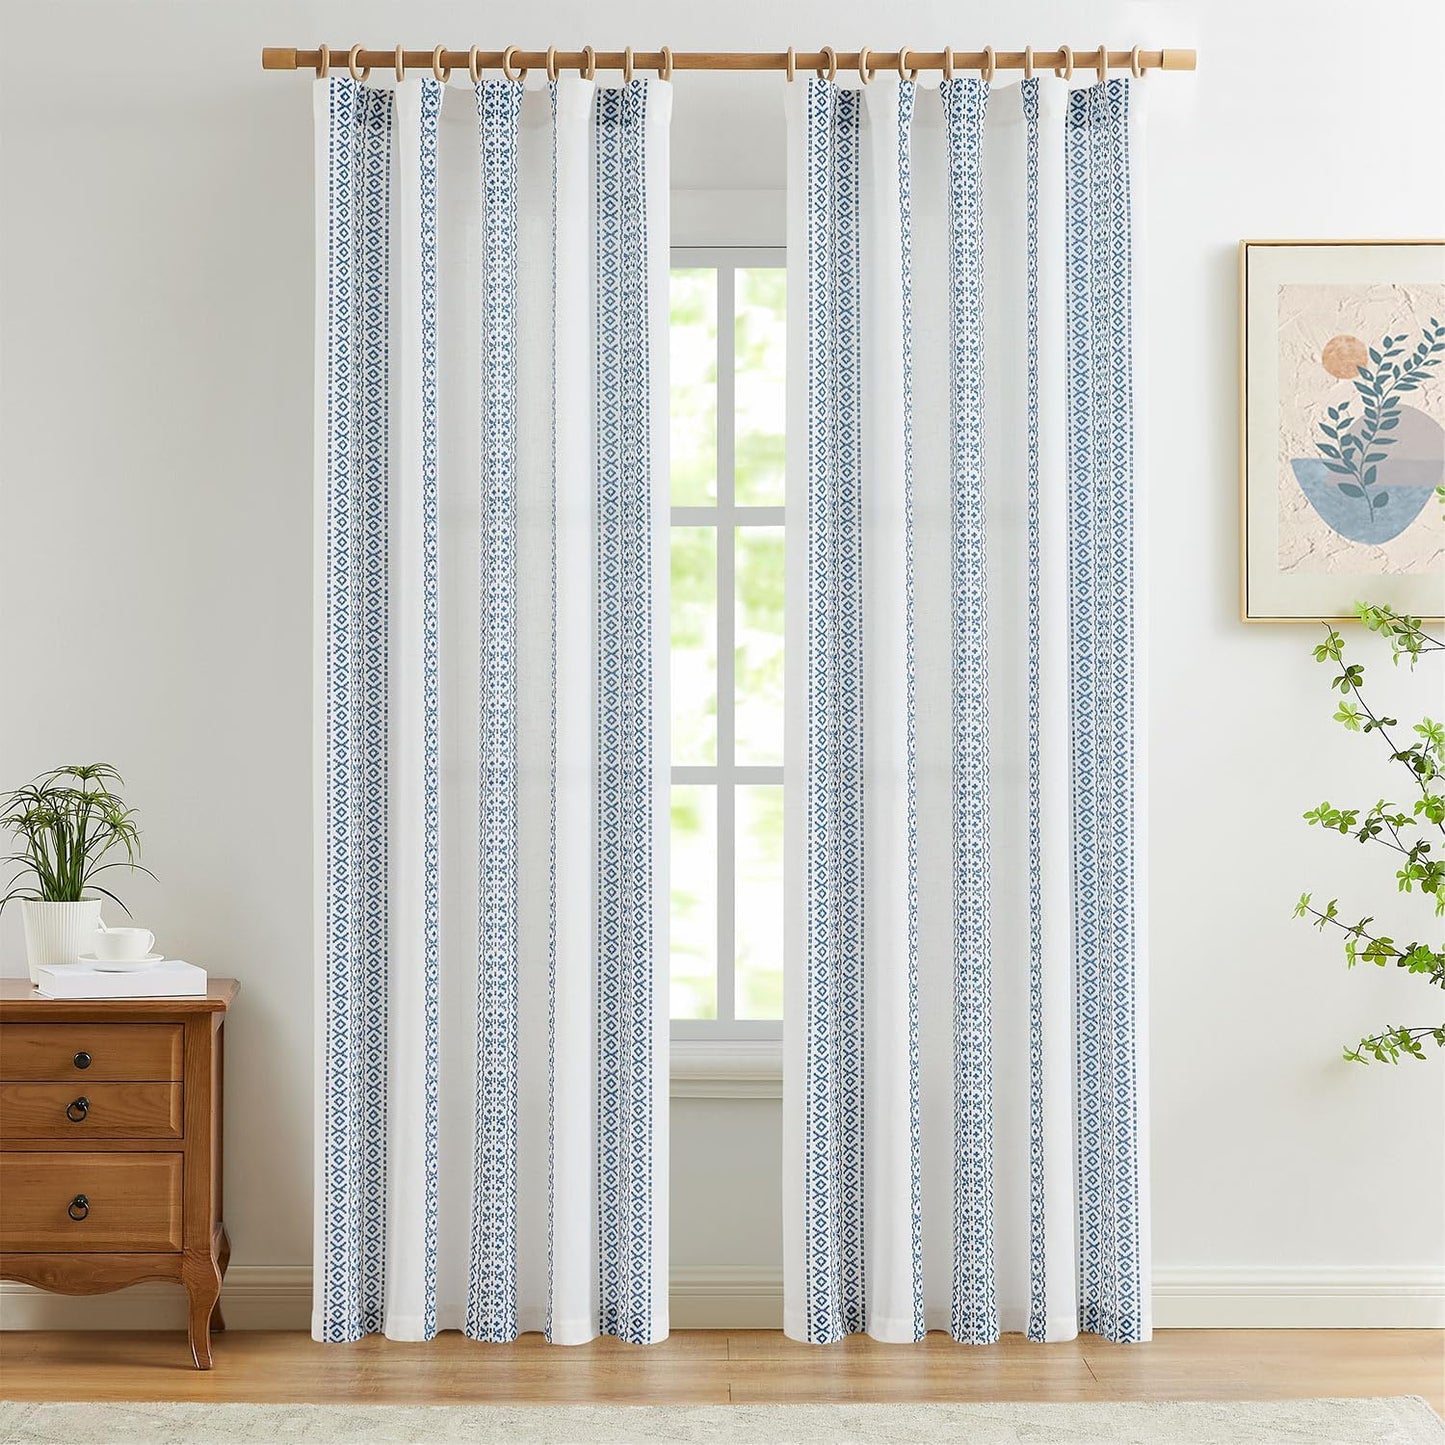 Jinchan Boho Linen Curtains 84 Inches Long Country Farmhouse Printed Living Room Bedroom Curtains Dark Blue on White Window Curtains Rod Pocket Back Tab Geometric Light Filtering Curtain Set 2 Panels  CKNY HOME FASHION   